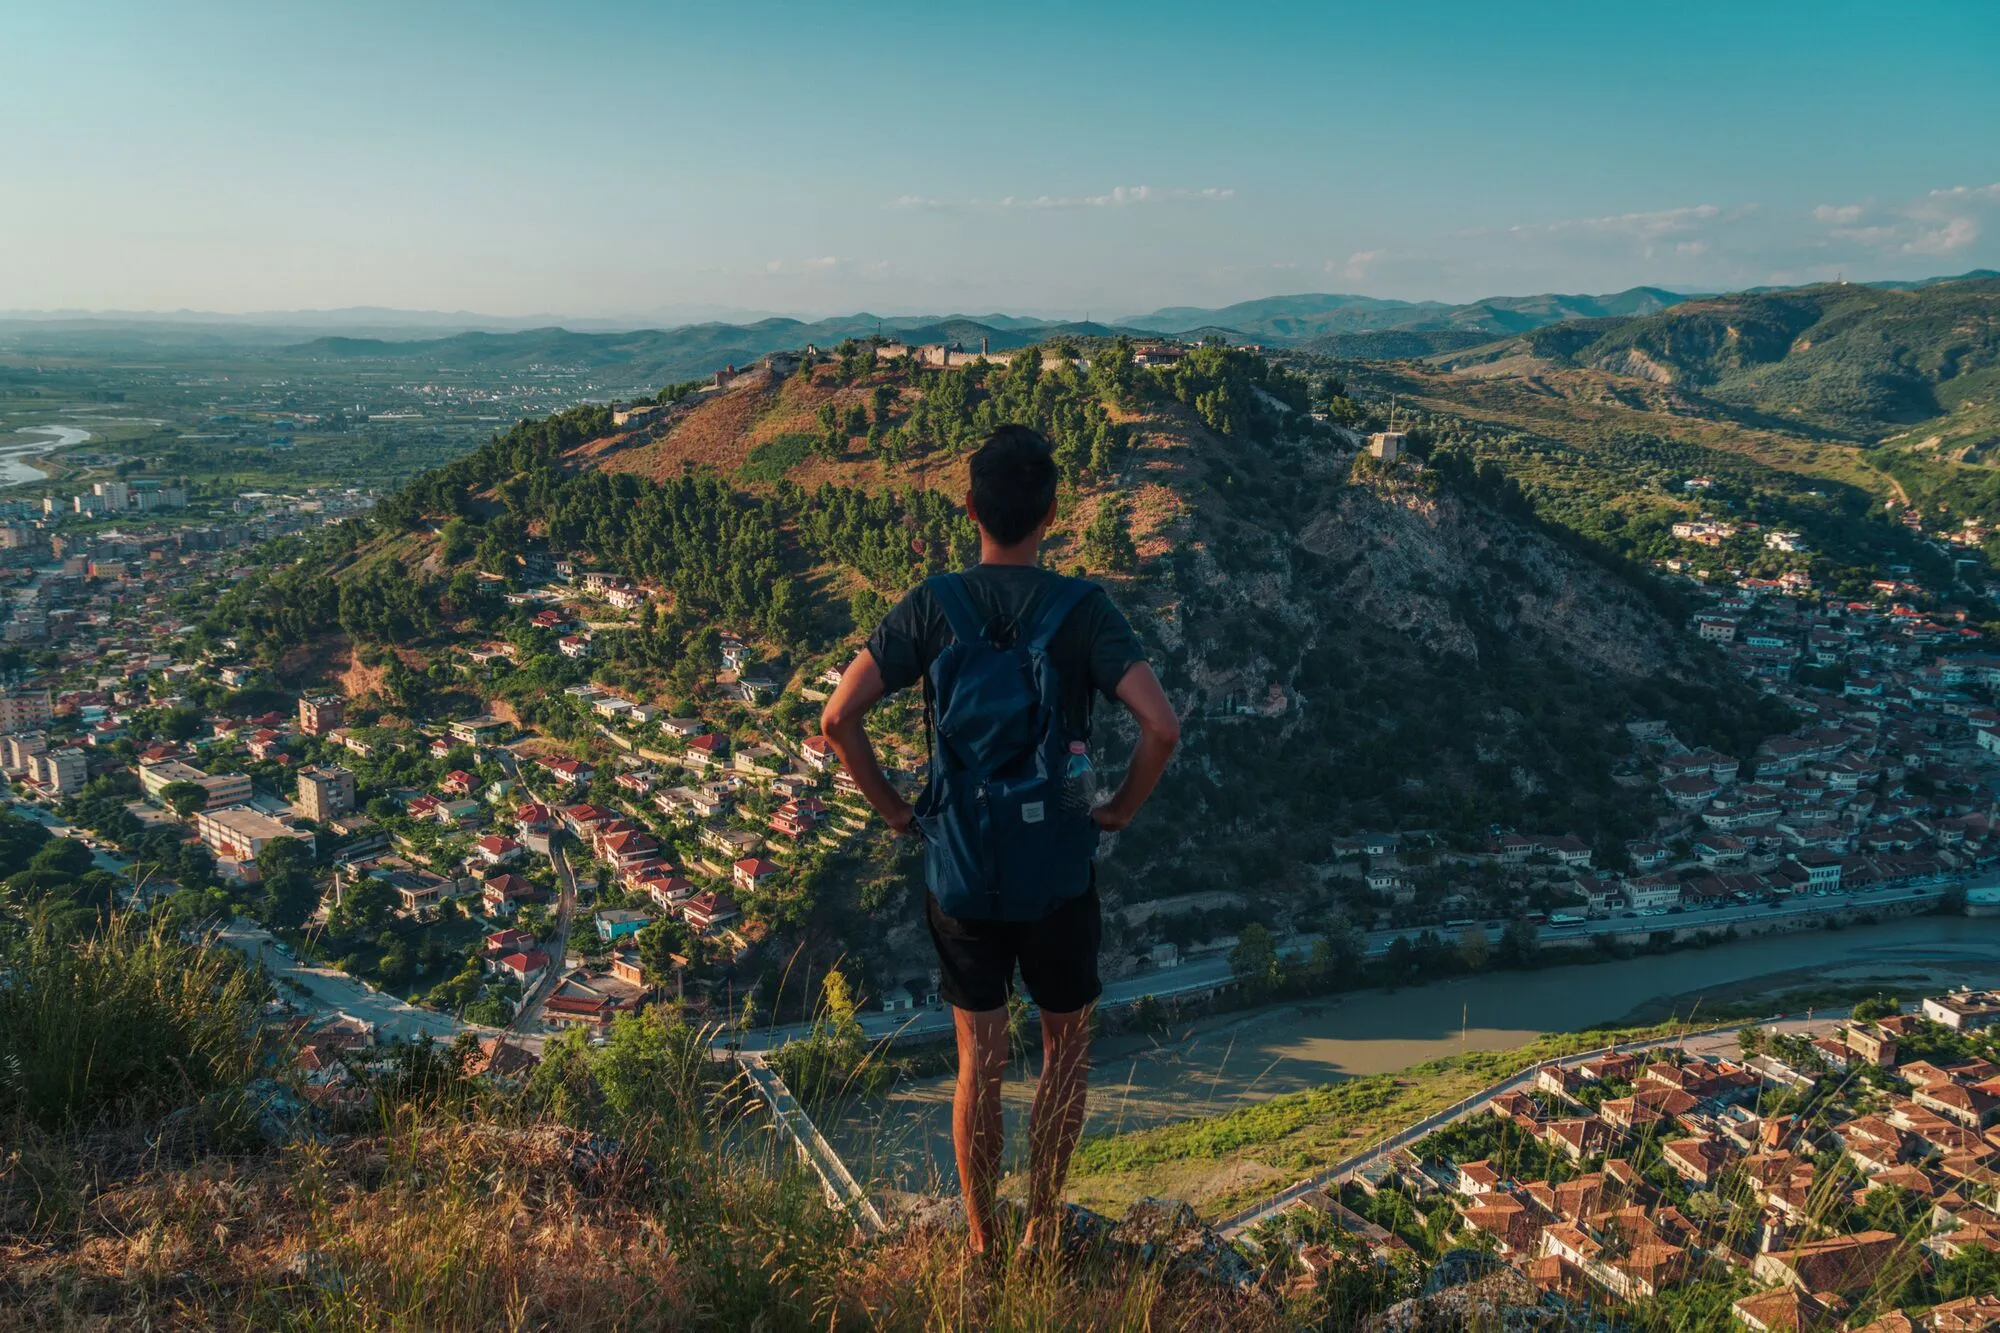 Top 8 Things to Do in Berat, Albania for Solo Travelers - A Complete Guide to Backpacking Berat